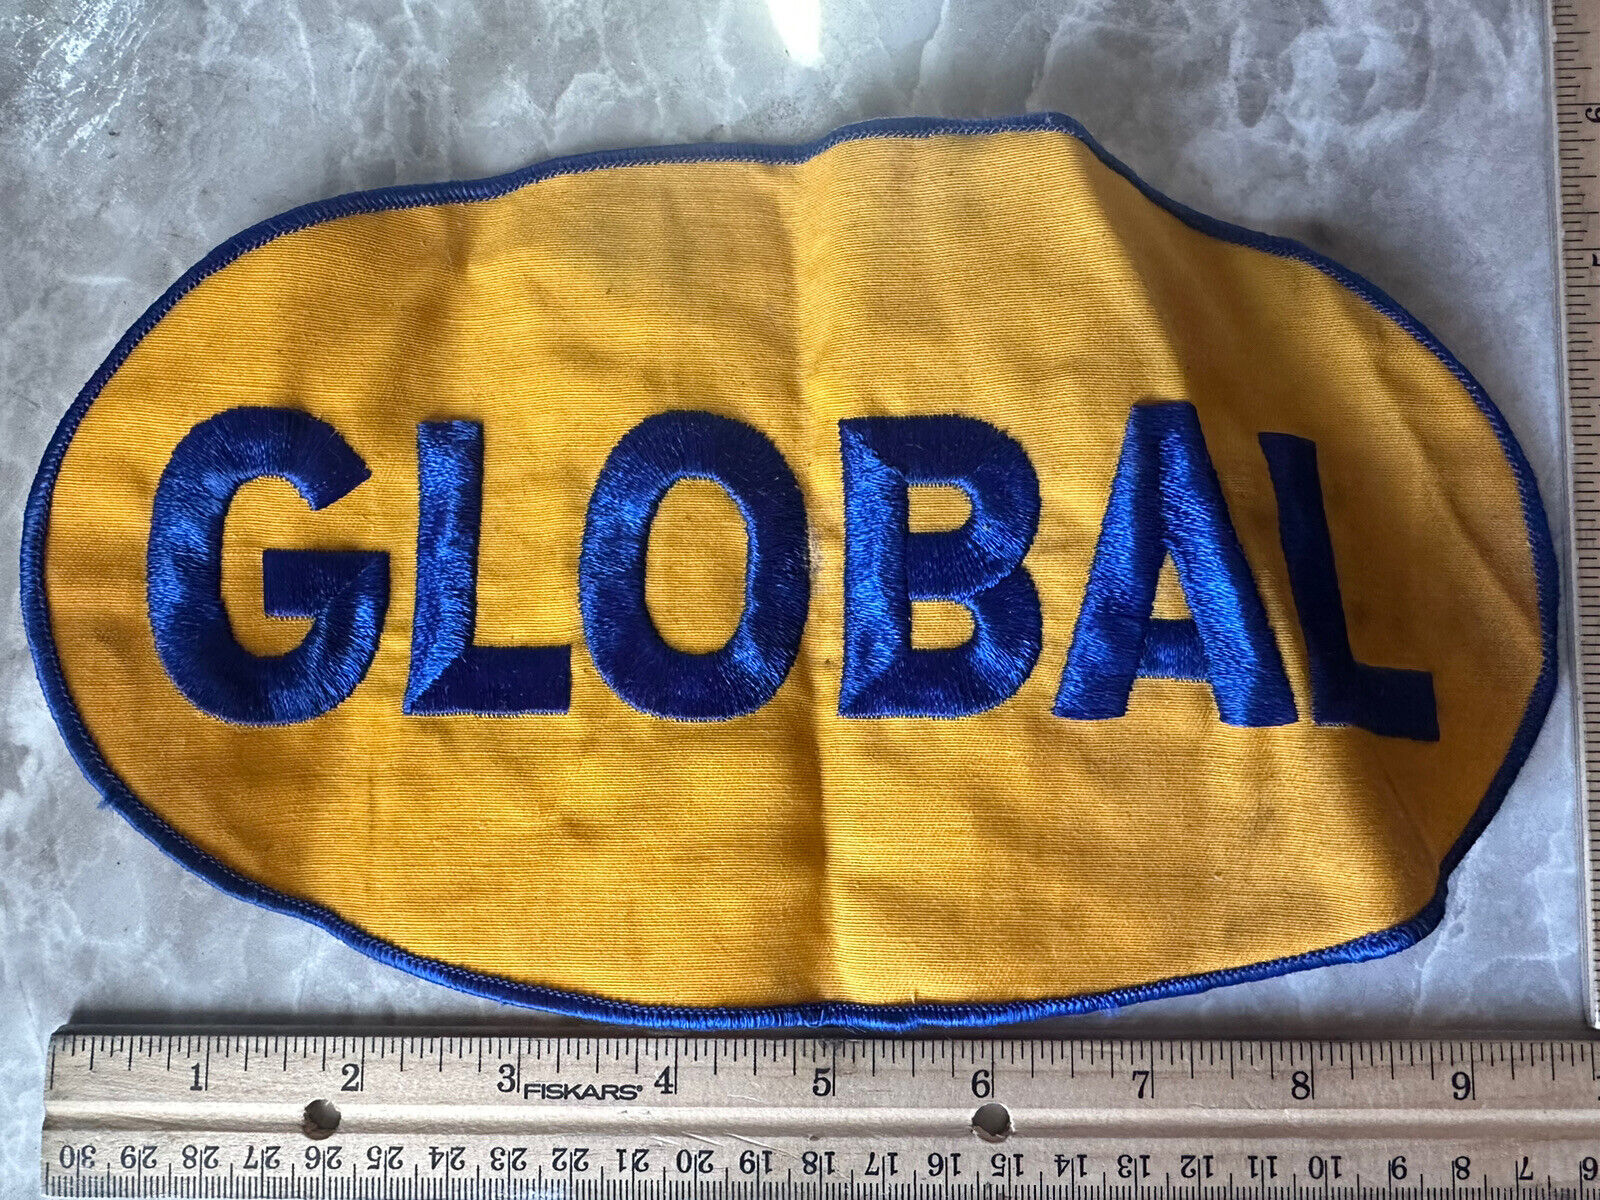 Global Vintage Patch Rare Large Yellow Stained Used